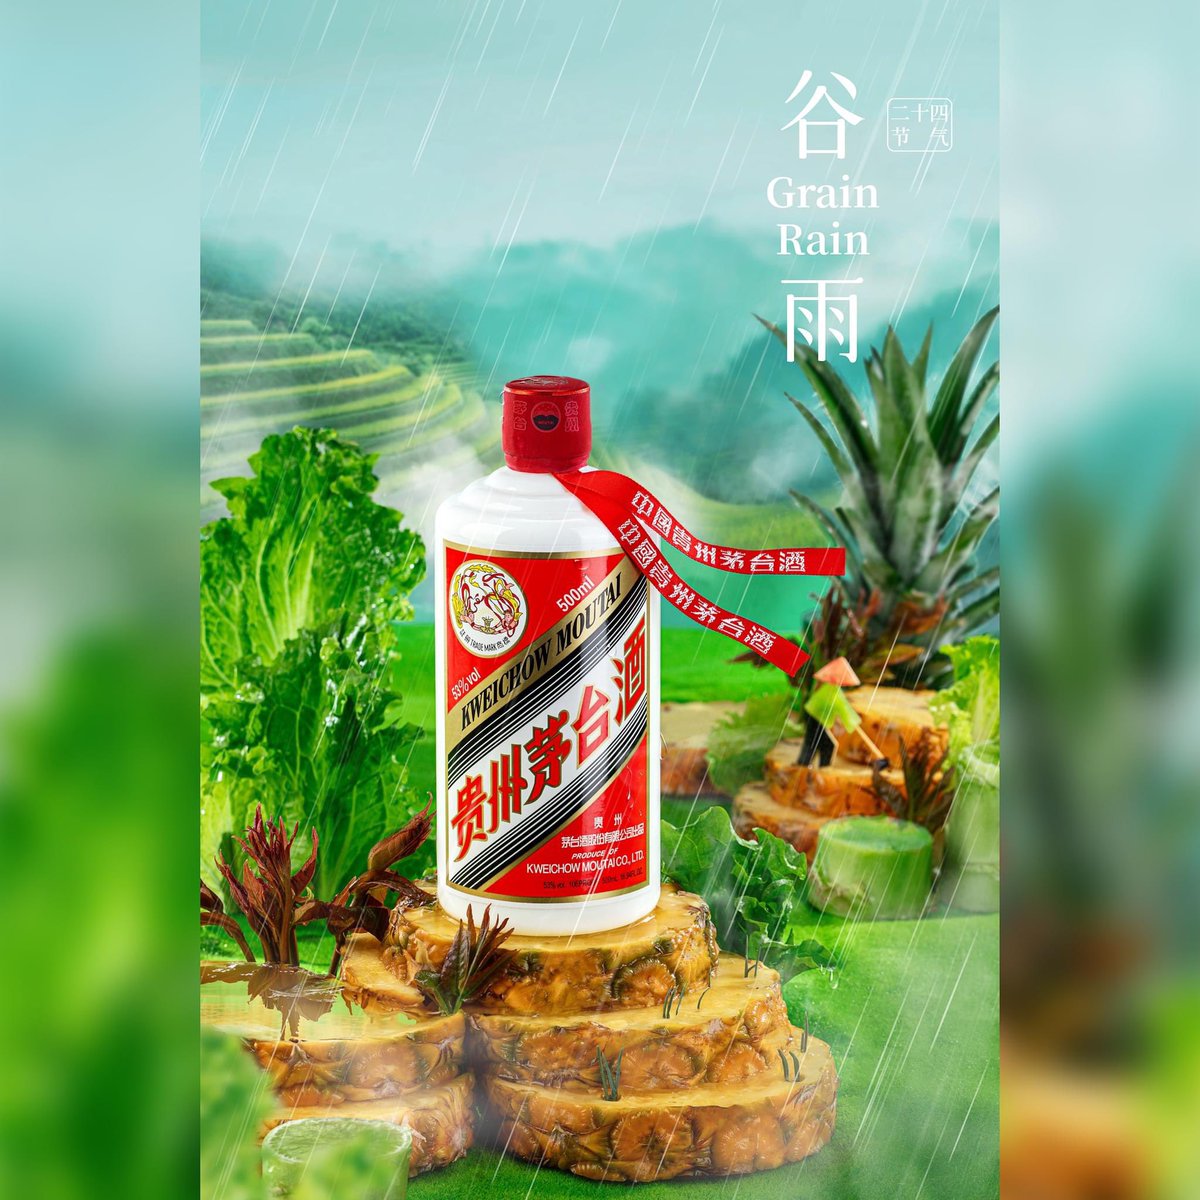 Grain Rain is the last solar term of spring, and it is also regarded as “Guyu Talents’ Day” by #Moutai.
Only when the time of nature is adapted can fine liquor be produced; and only when talents are respected can the future be prosperous.
#MoreSolarTerms #China